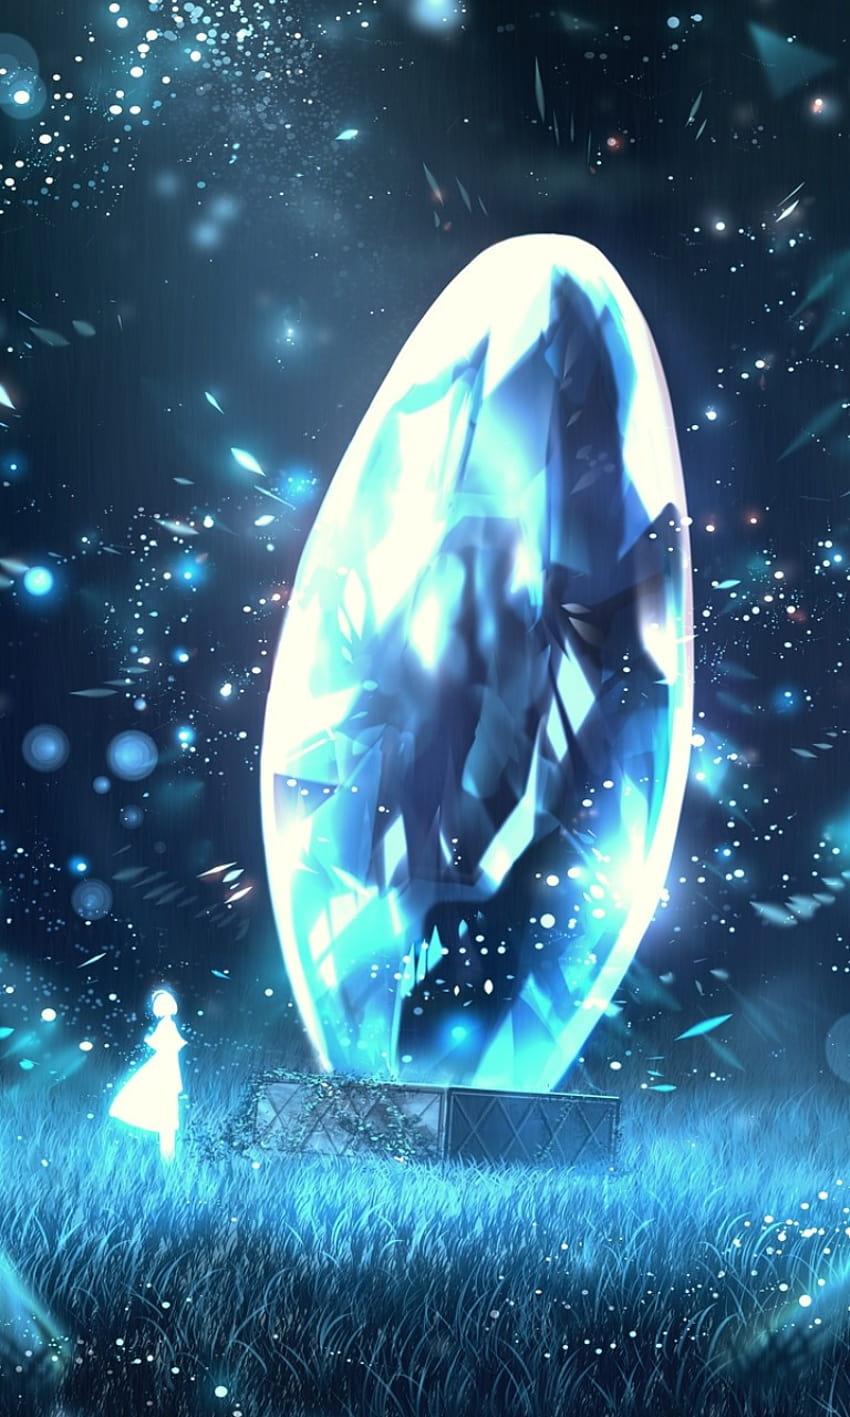 768x1280 Anime Landscape, Magical Object, Crystal, Anime Girl, Glowing for Galaxy SIV,Nokia Lumia 900,925,1020, Acer Picasso, glowing anime HD phone wallpaper